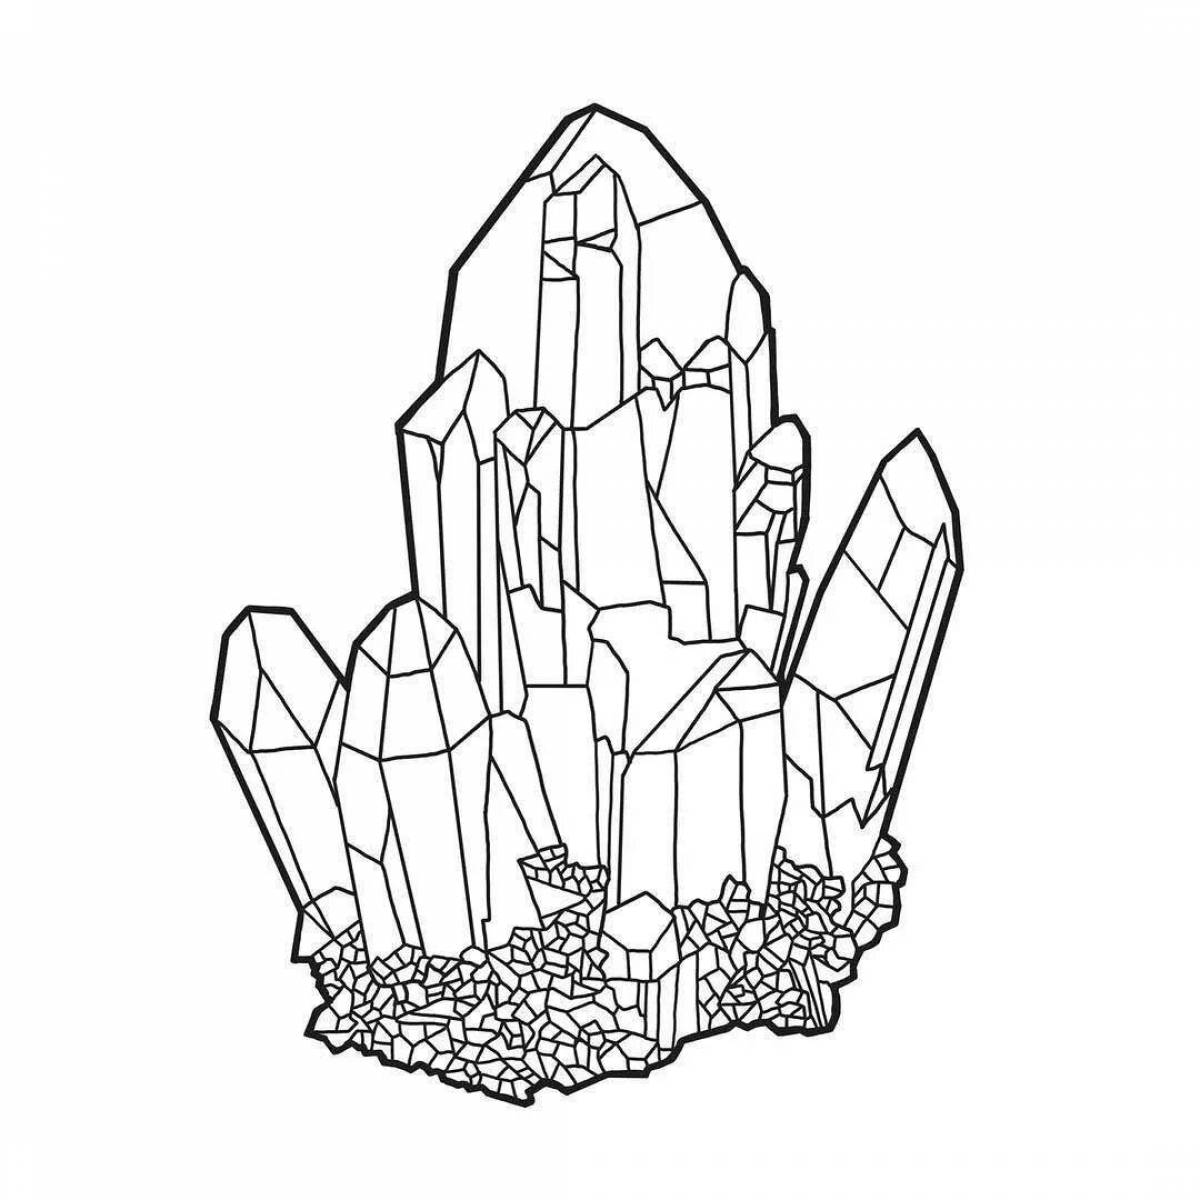 Attractive minerals coloring book for kids